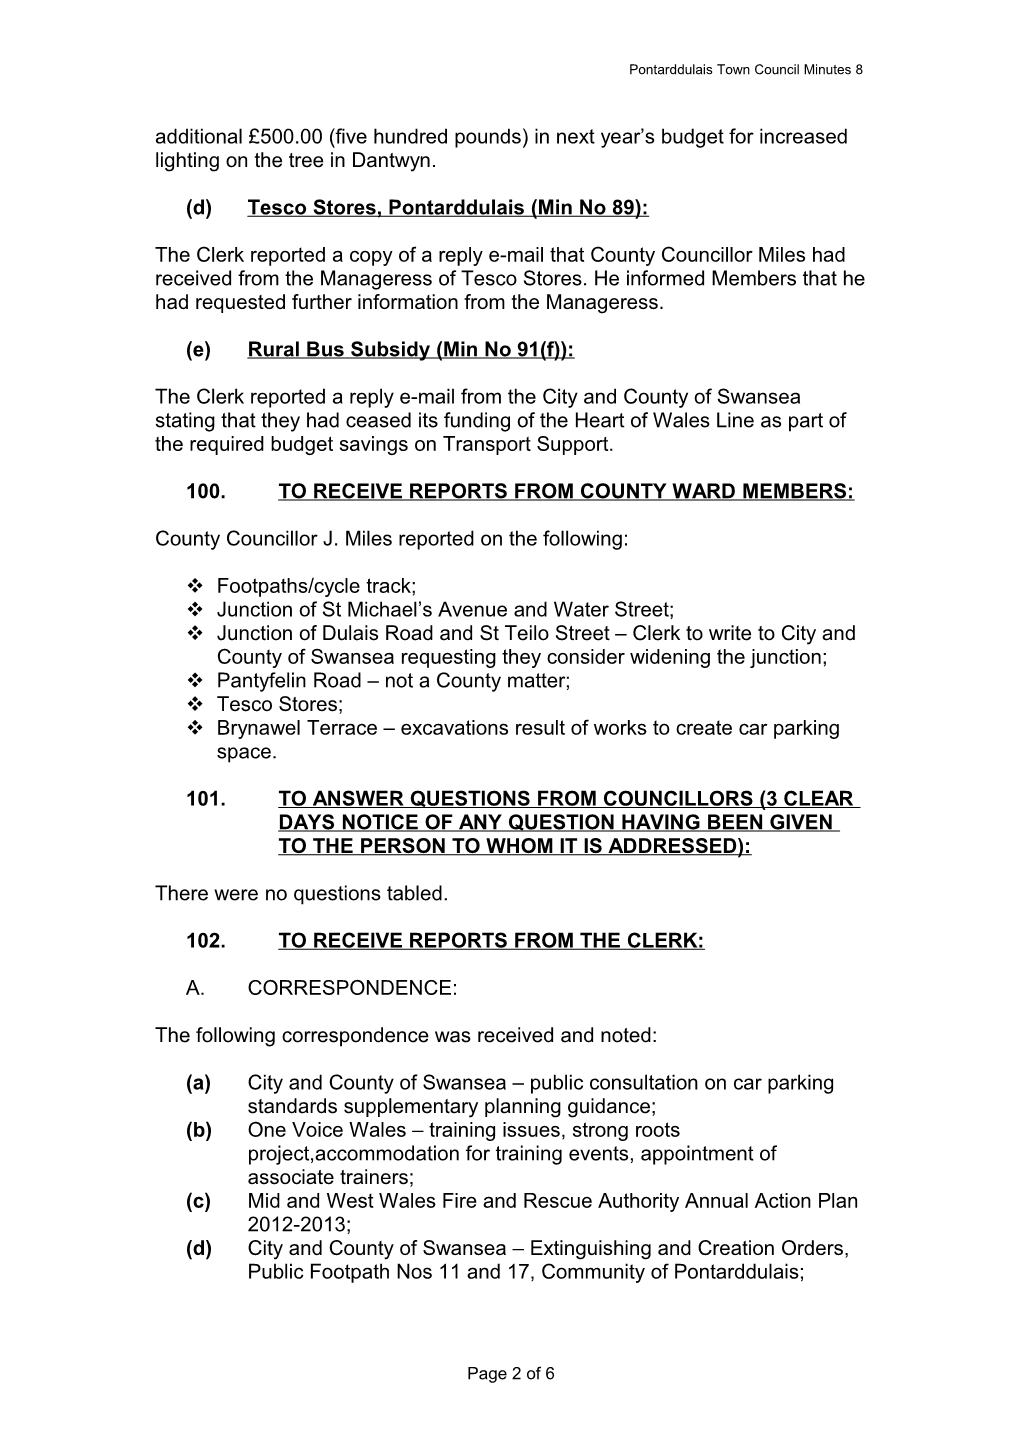 Minutes of the Pontarddulais Town Council Held on the 8Th January 2008